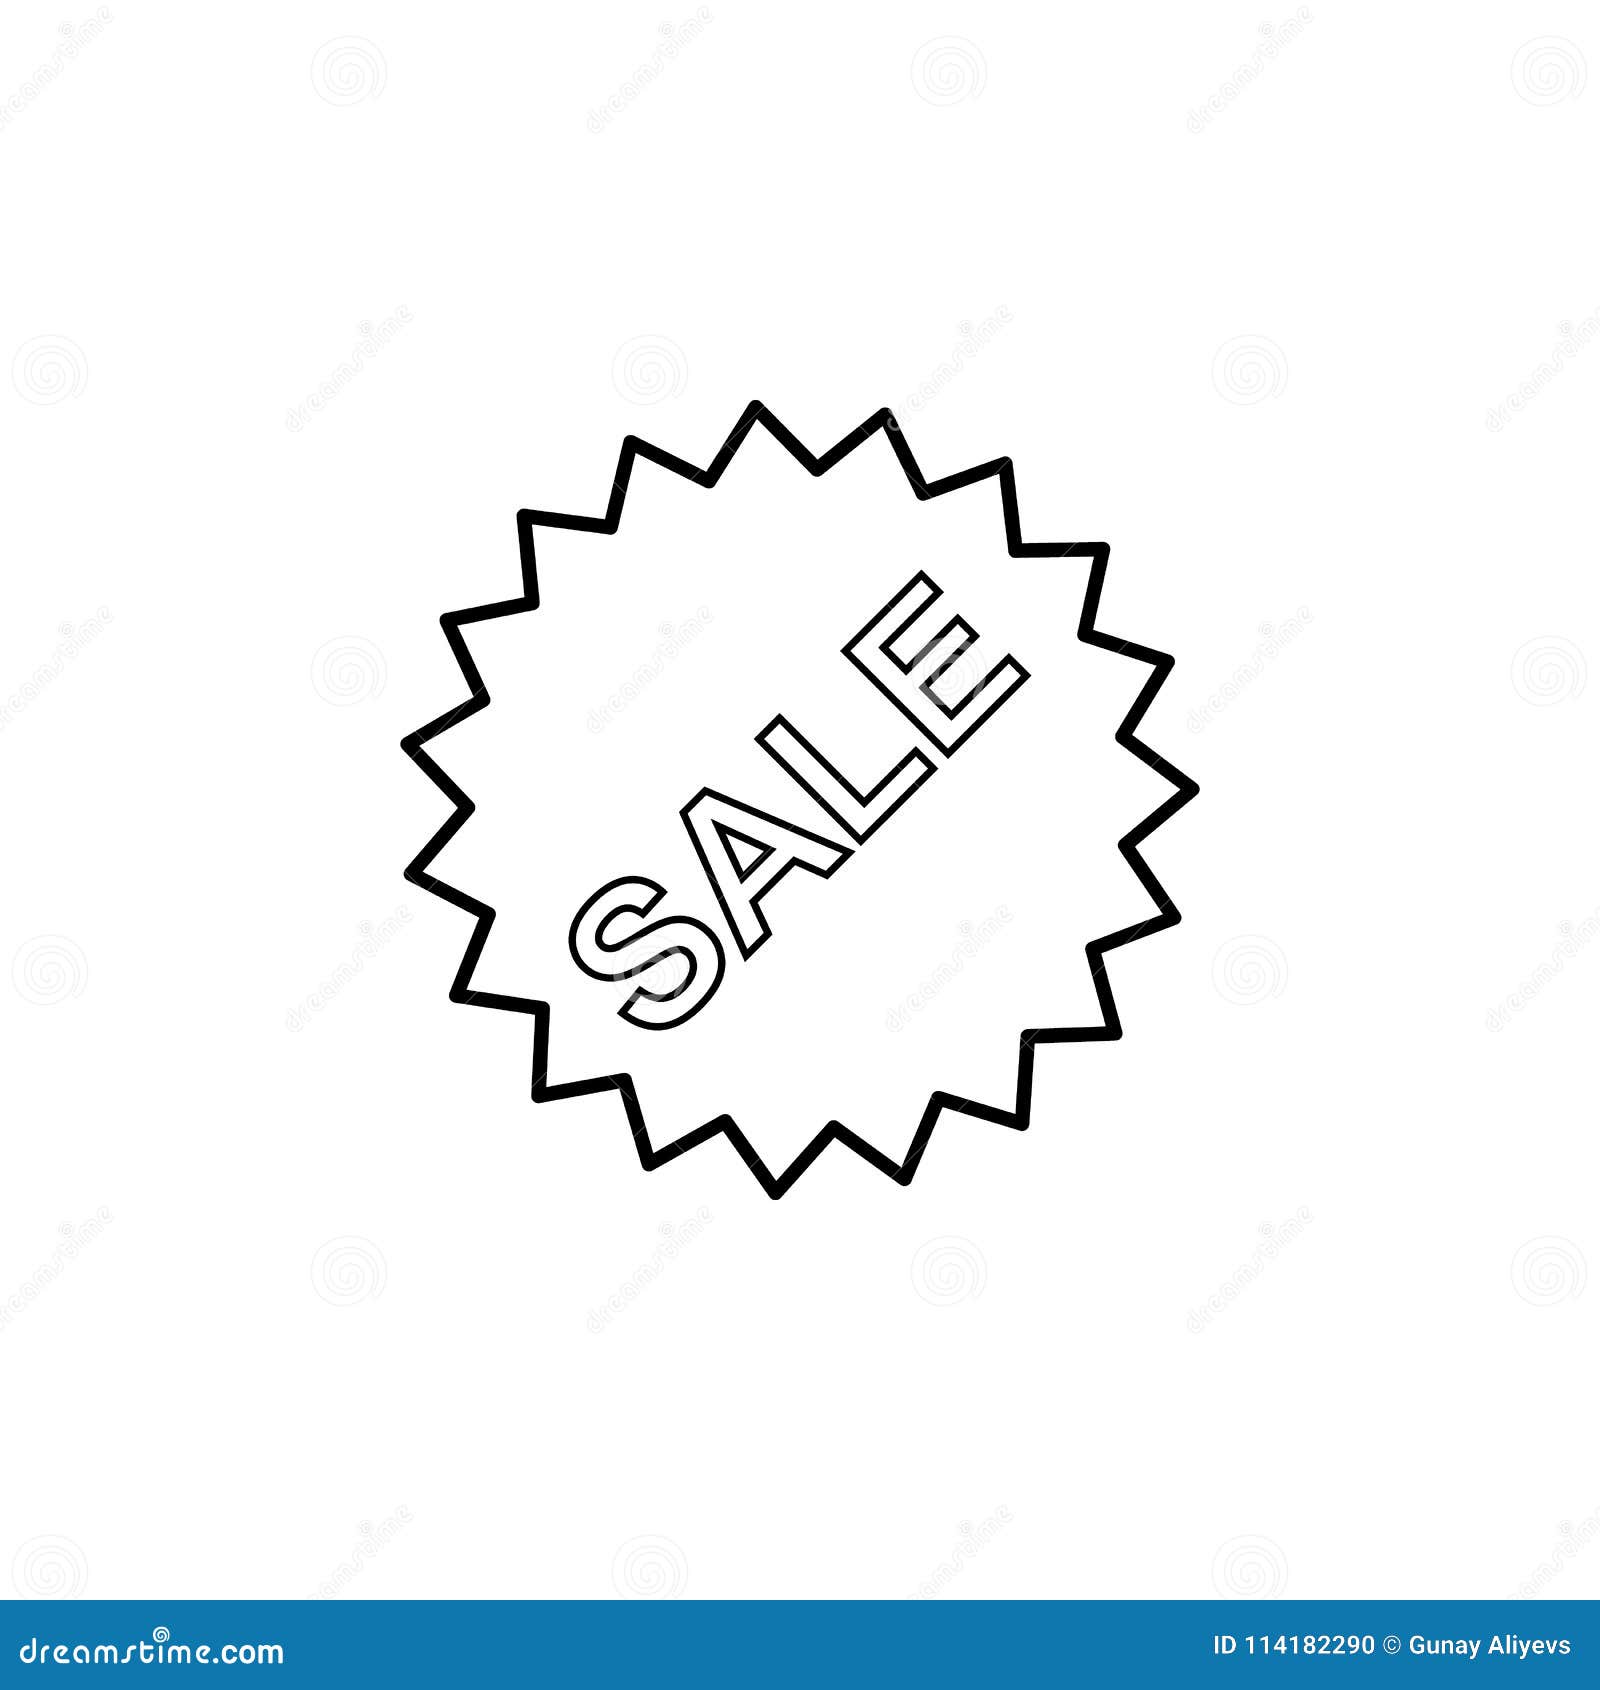  House  With Sale Or Price  Label Vector Illustration 